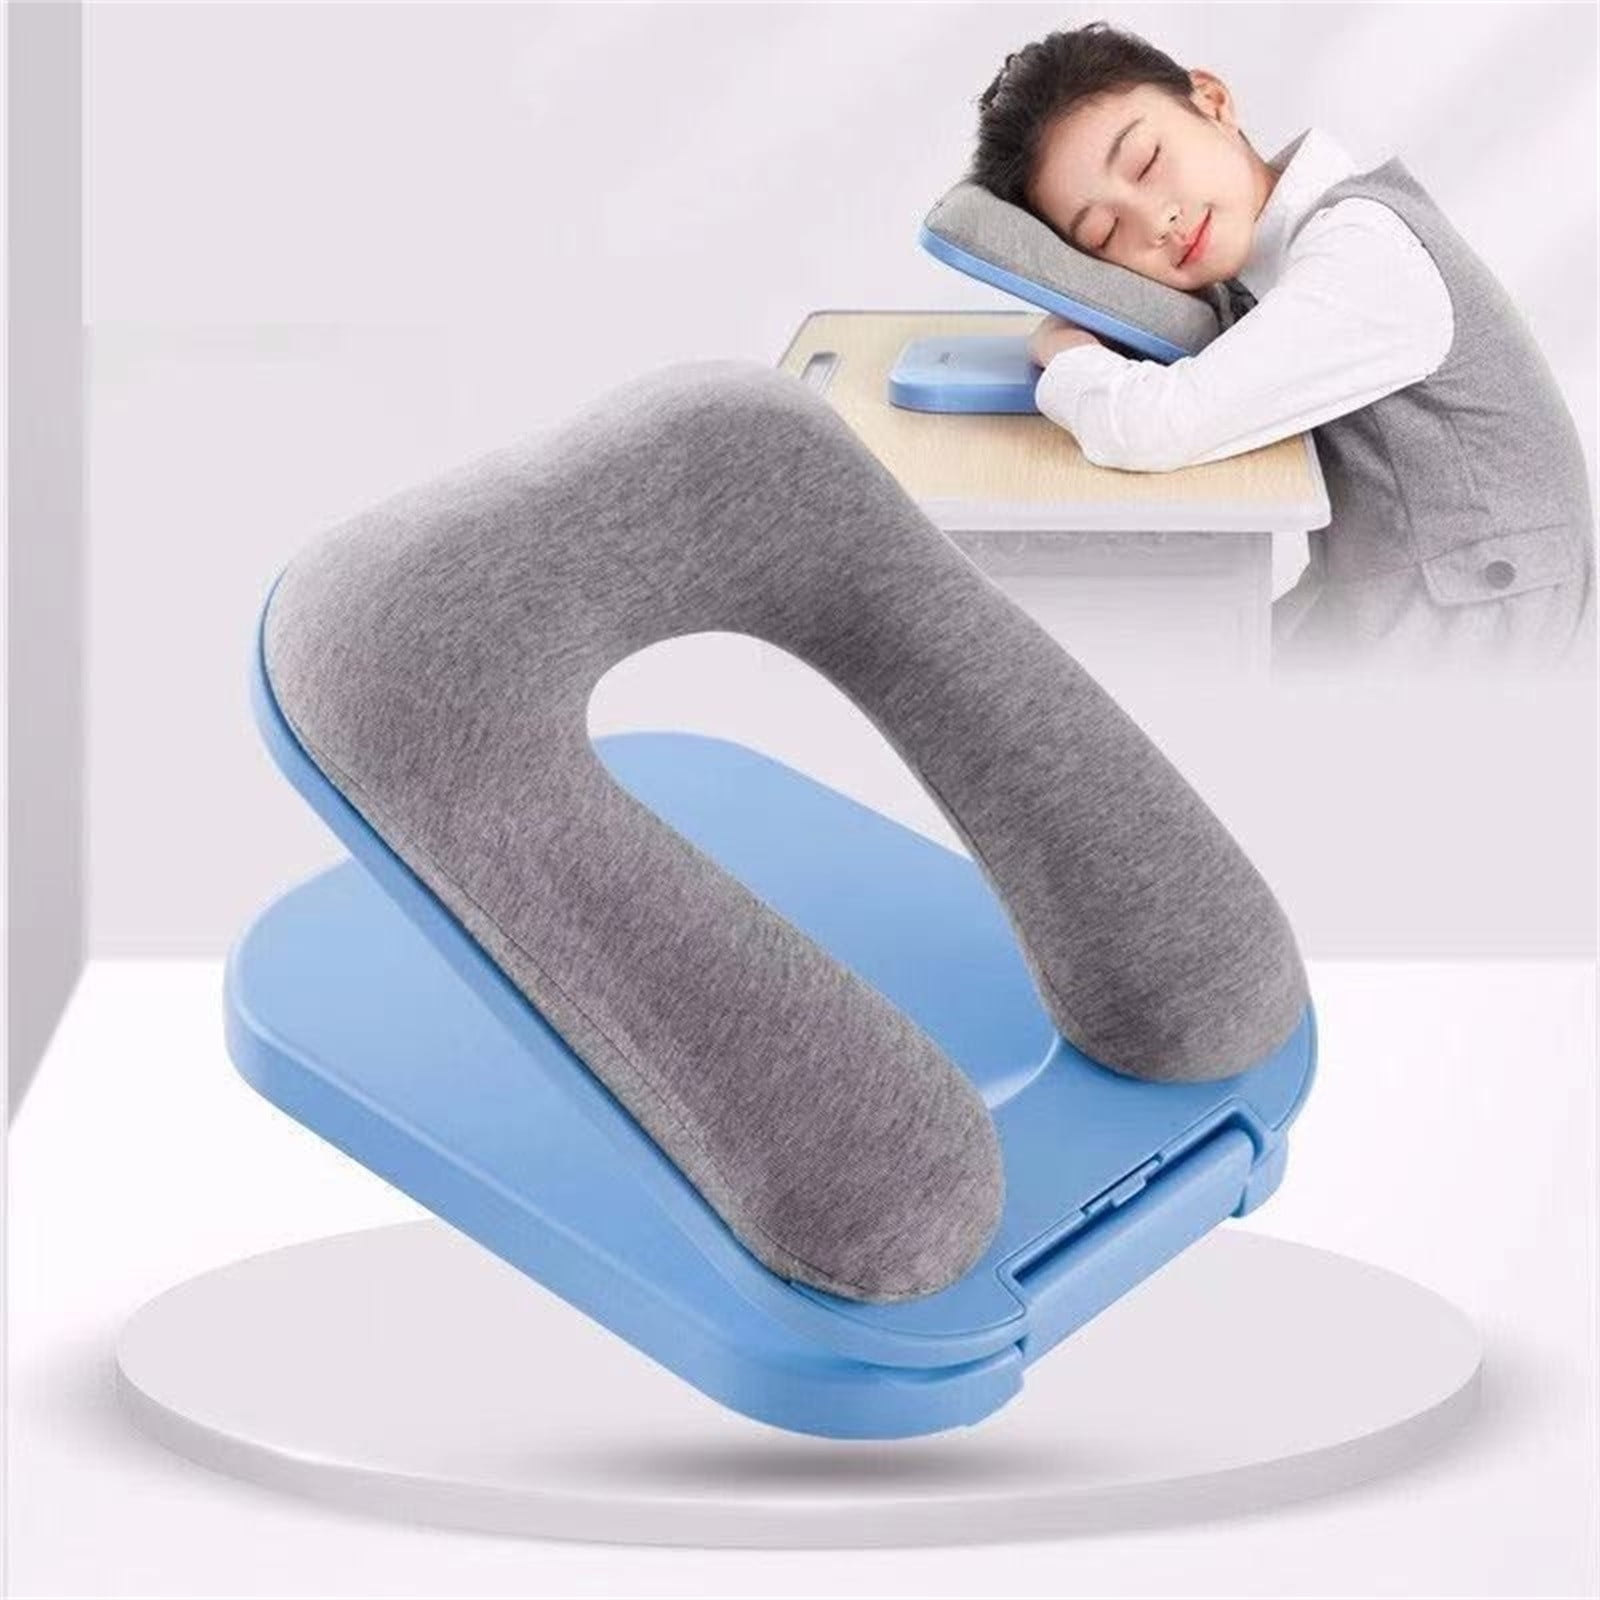 Travel Airplane Inflatable Pillow Sleeping Artifact Outdoor Lunch Break Pillow Portable Neck Inflatable Pillow